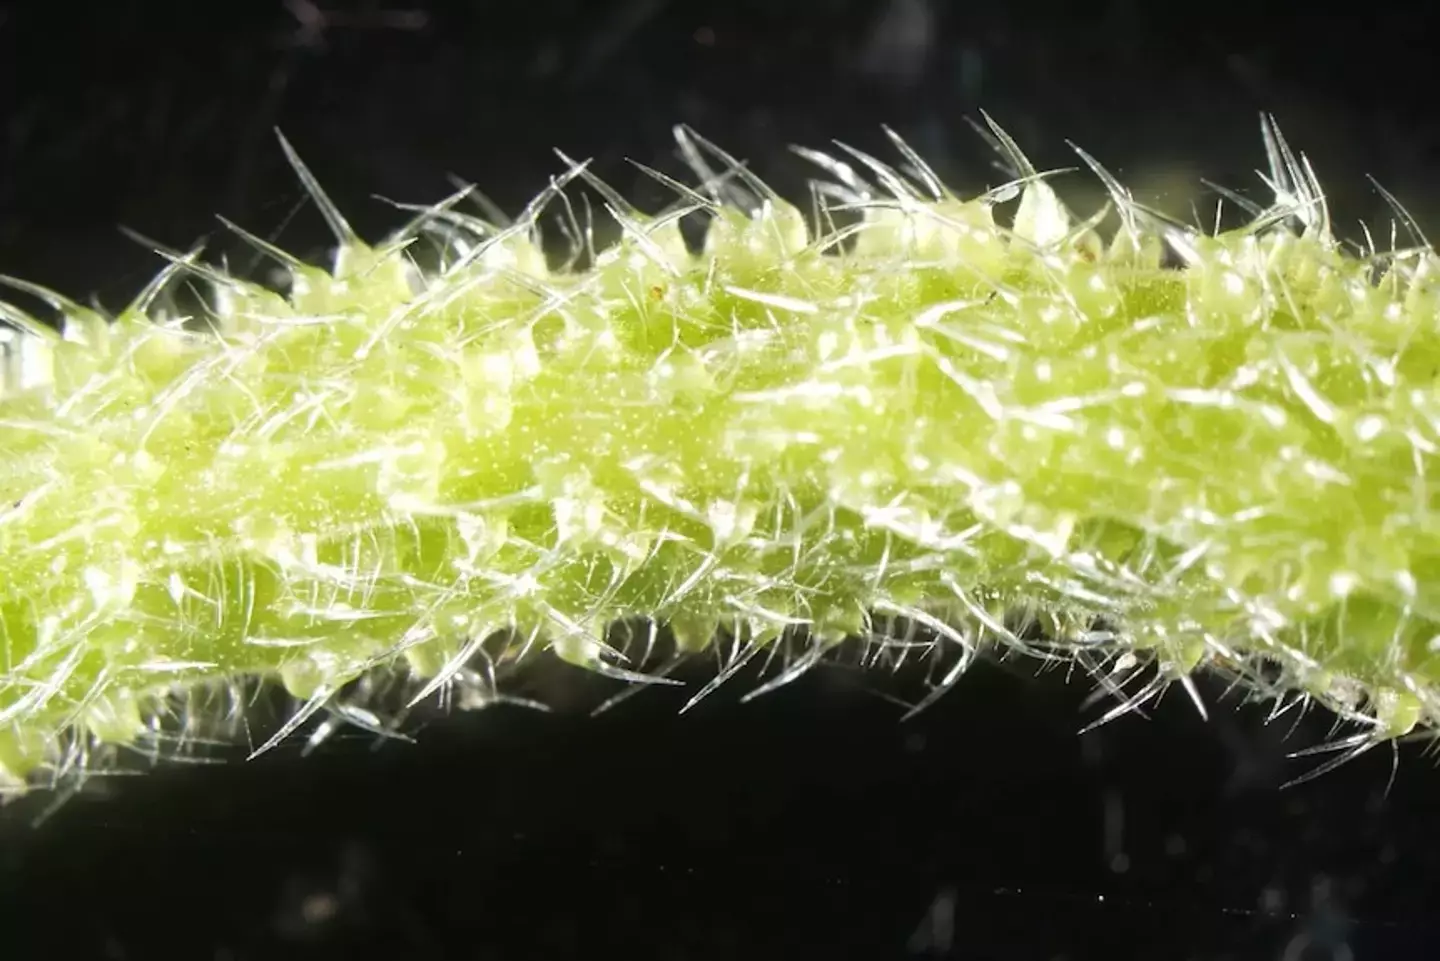 The terrifying plant is covered in tiny venomous hairs.